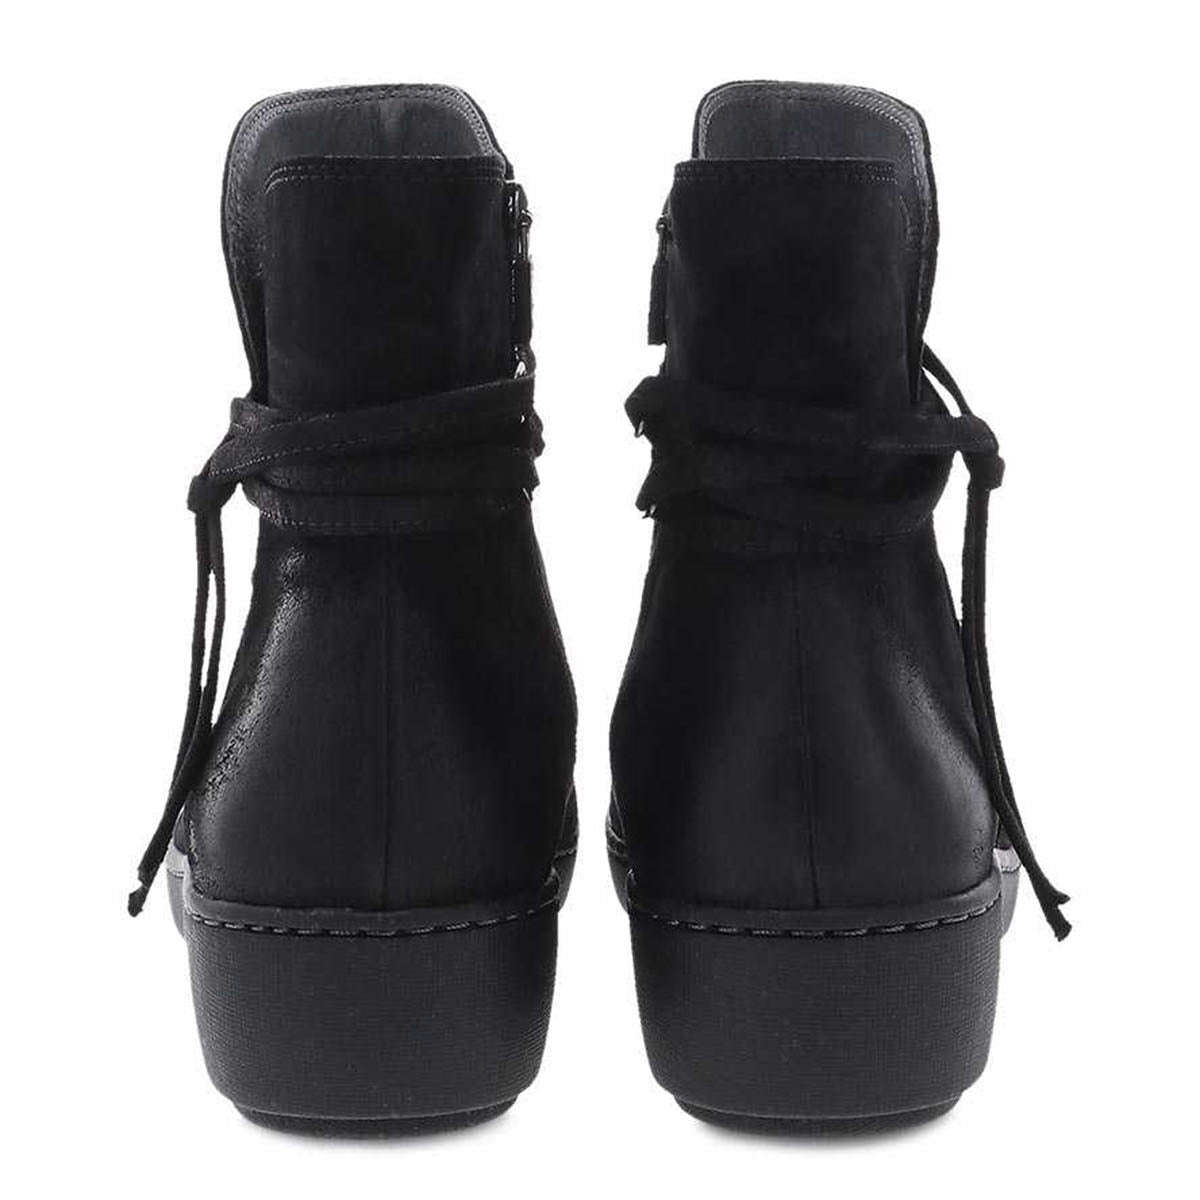 A pair of black lace-up Dansko Evelyn Black Burnished Suede booties viewed from the back.